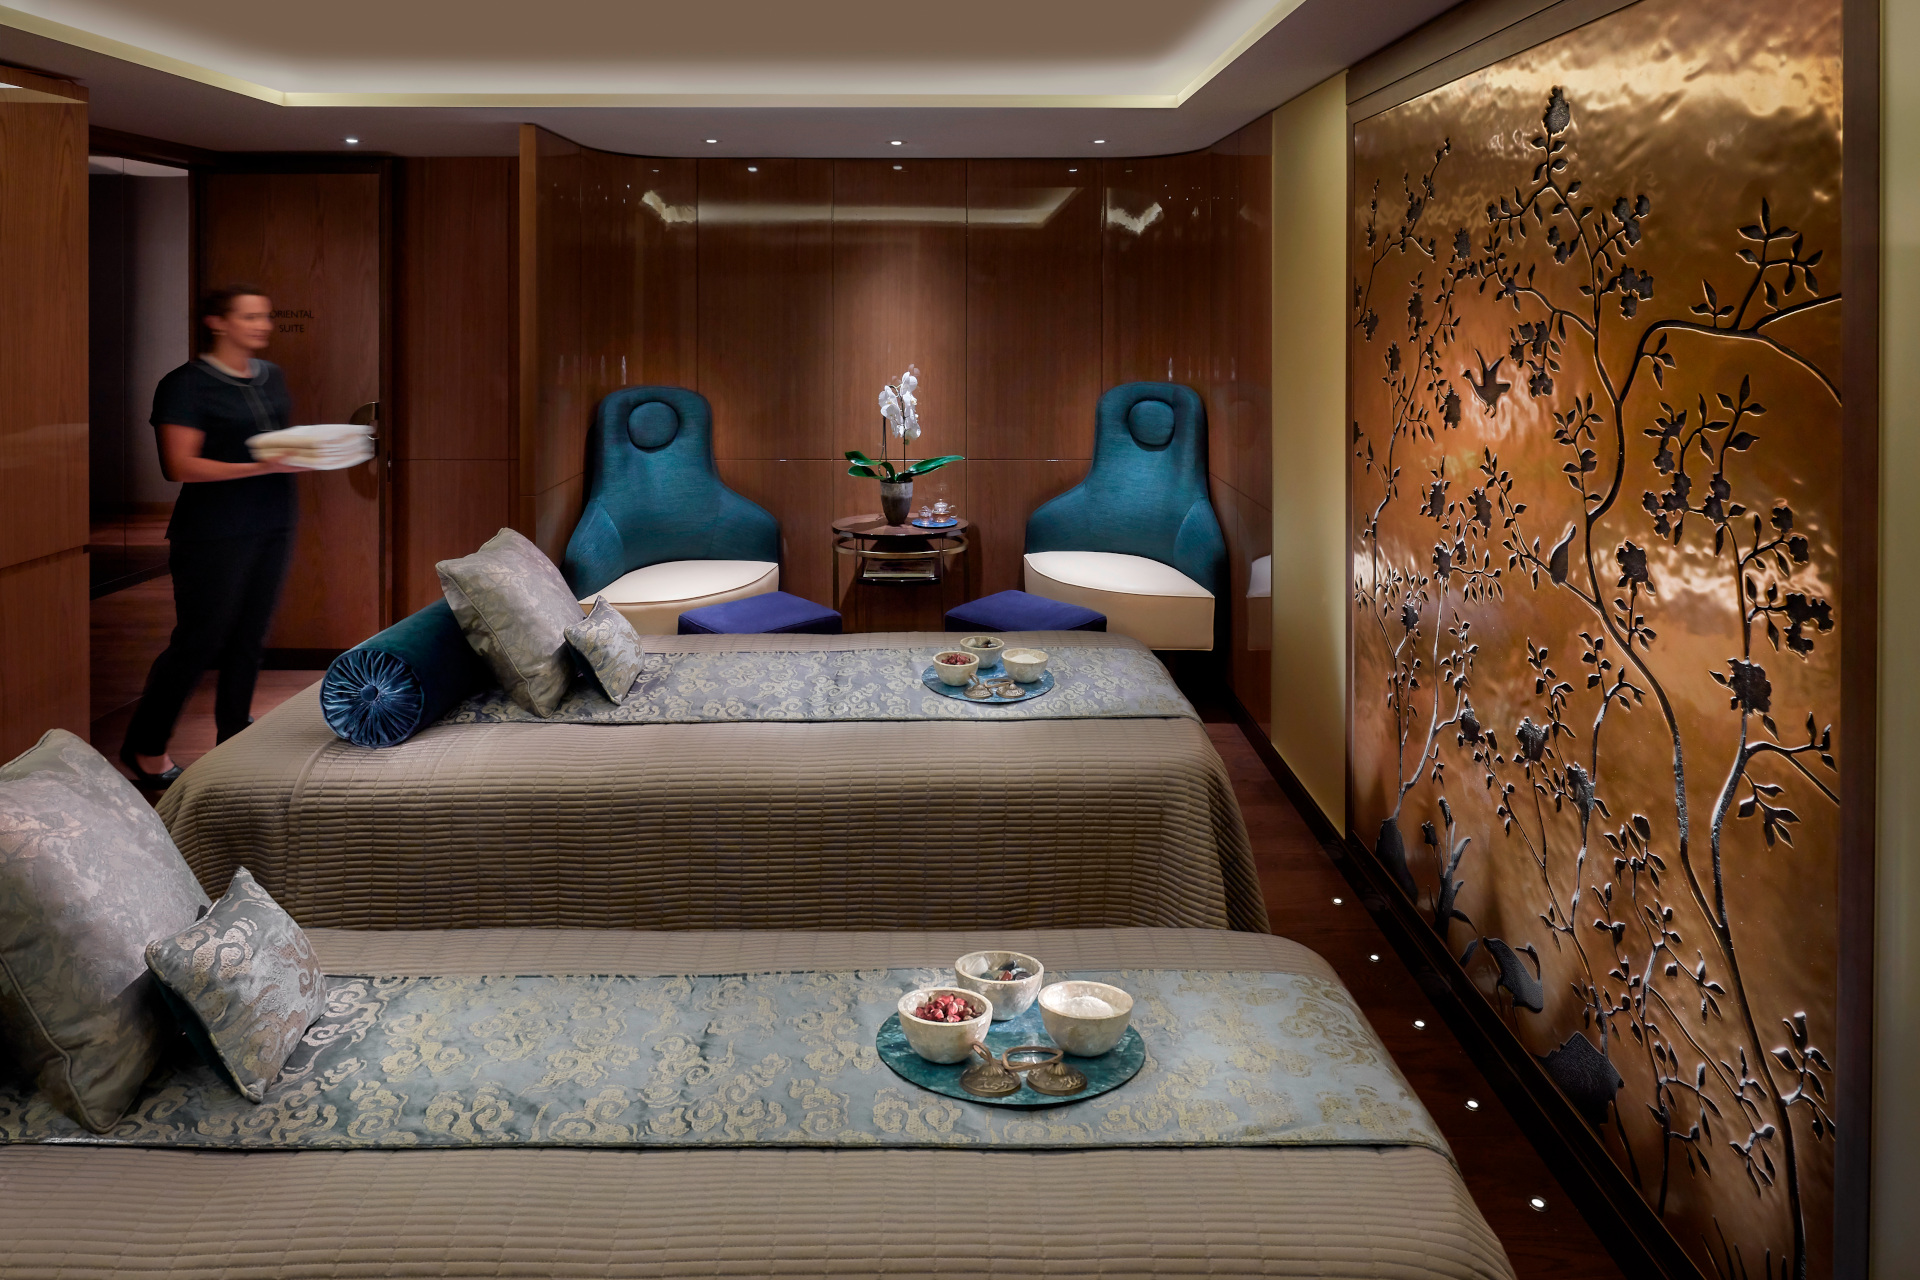 Treatment room at a spa, with made beds, blue chairs and gold walls